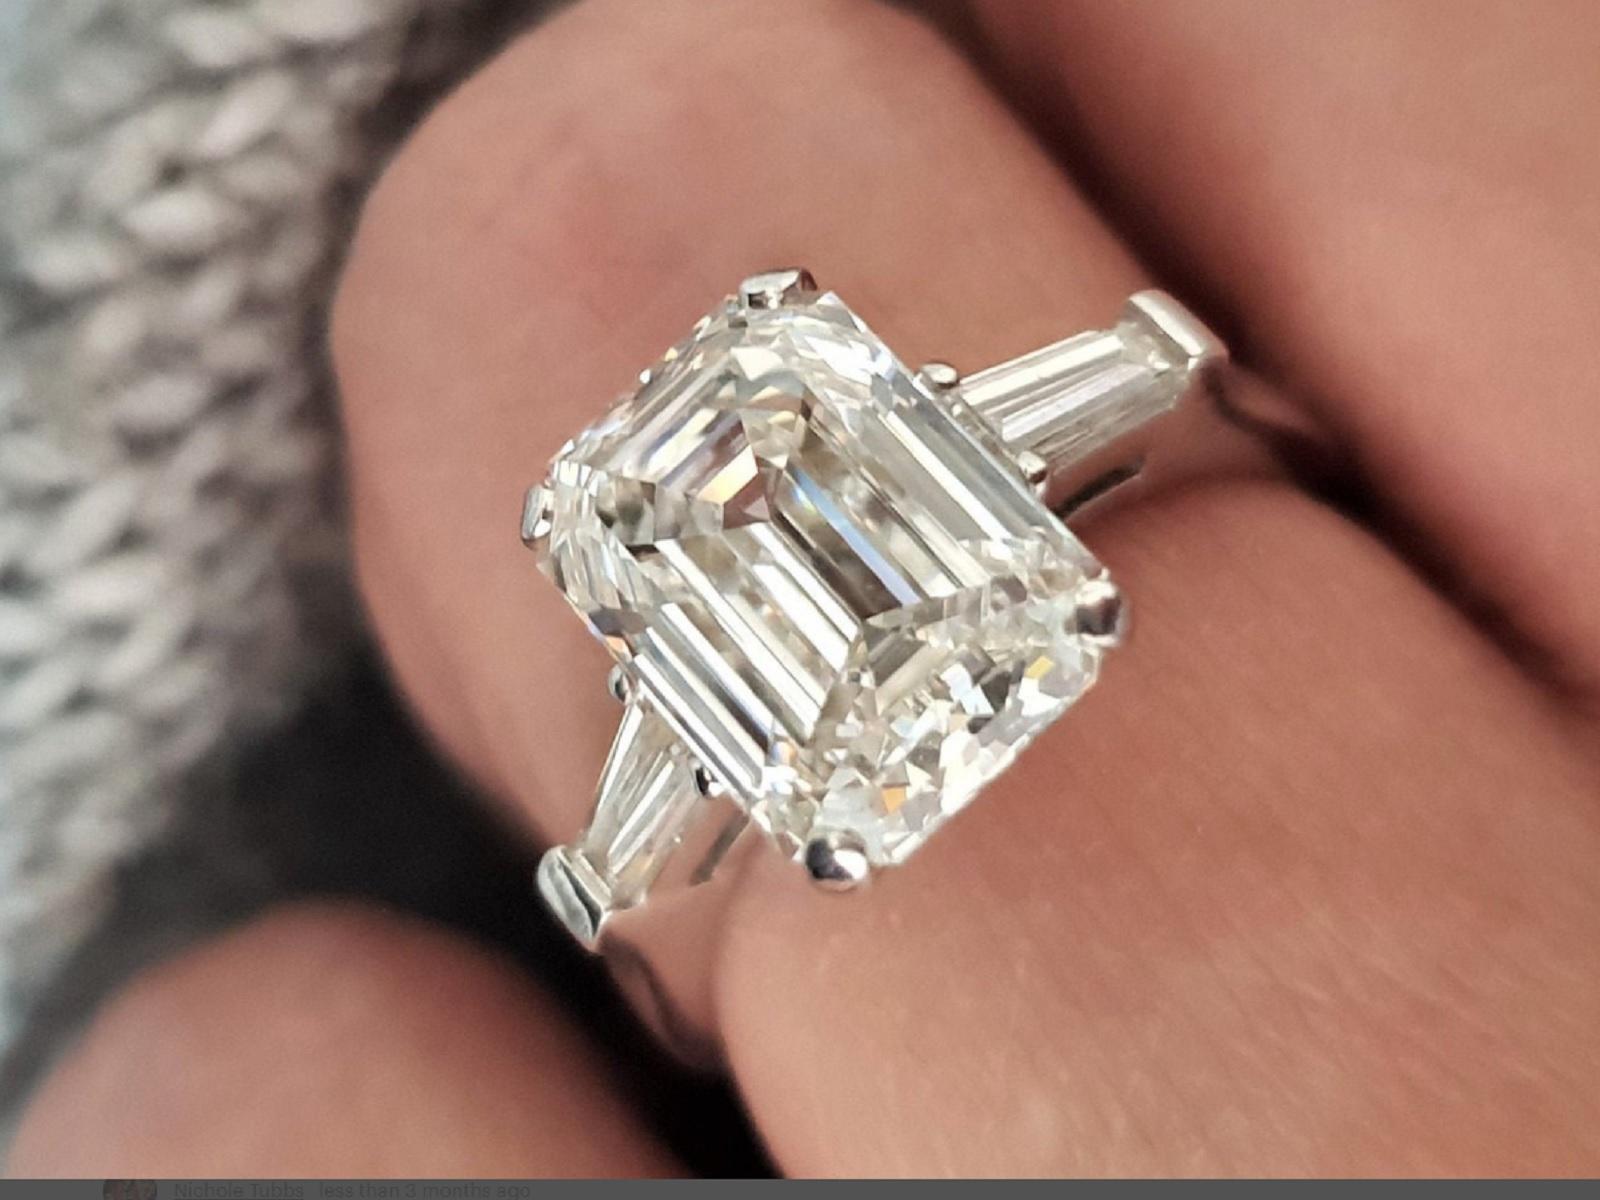 The top of the line a perfect 2.02 carat internally flawless emerald cut diamond G in color with excellent cut and no fluorescence.
